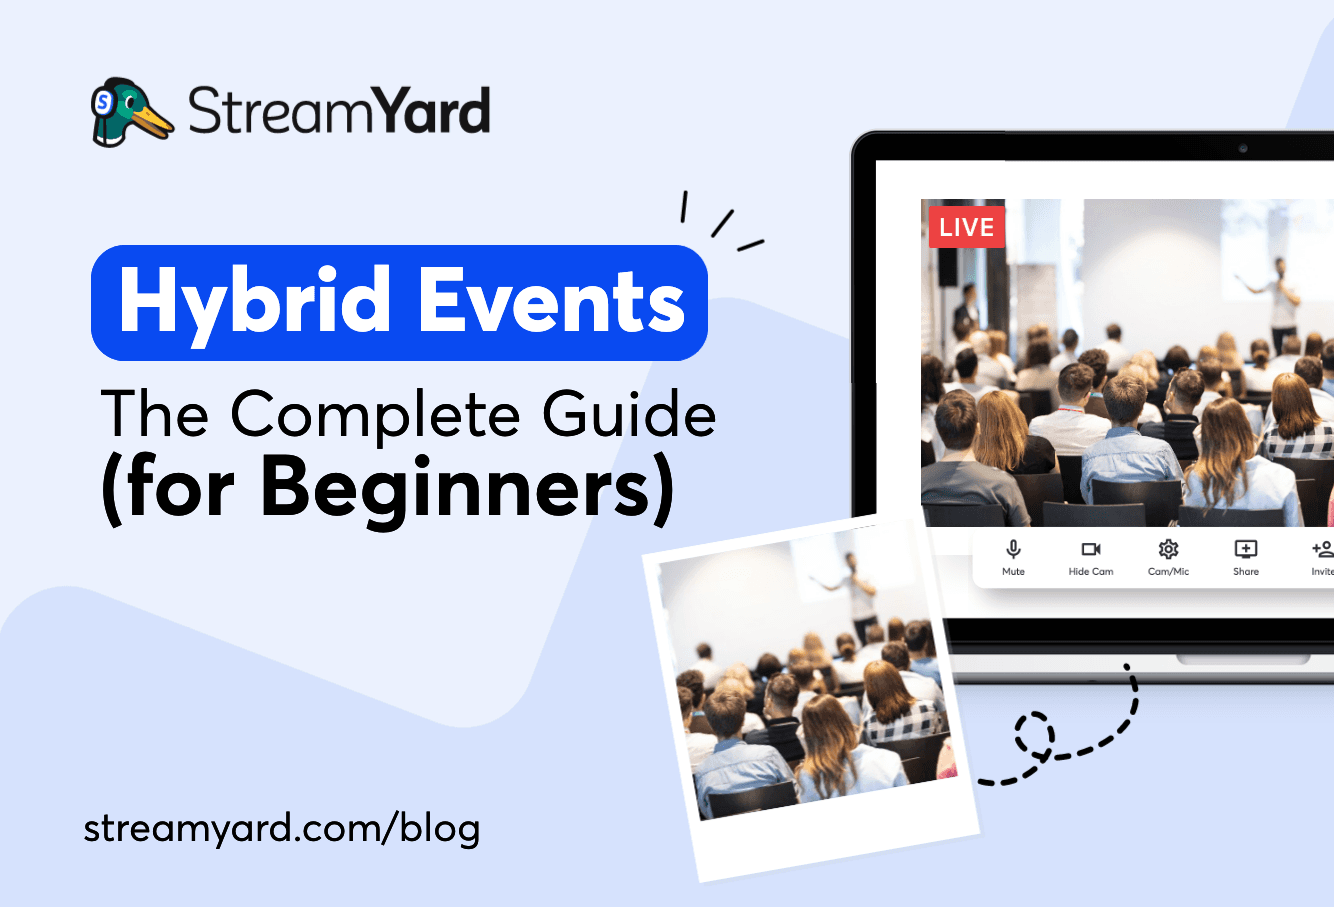 Learn how to run hybrid events and engage your audience offline and online with this easy guide on utilizing the hybrid model.